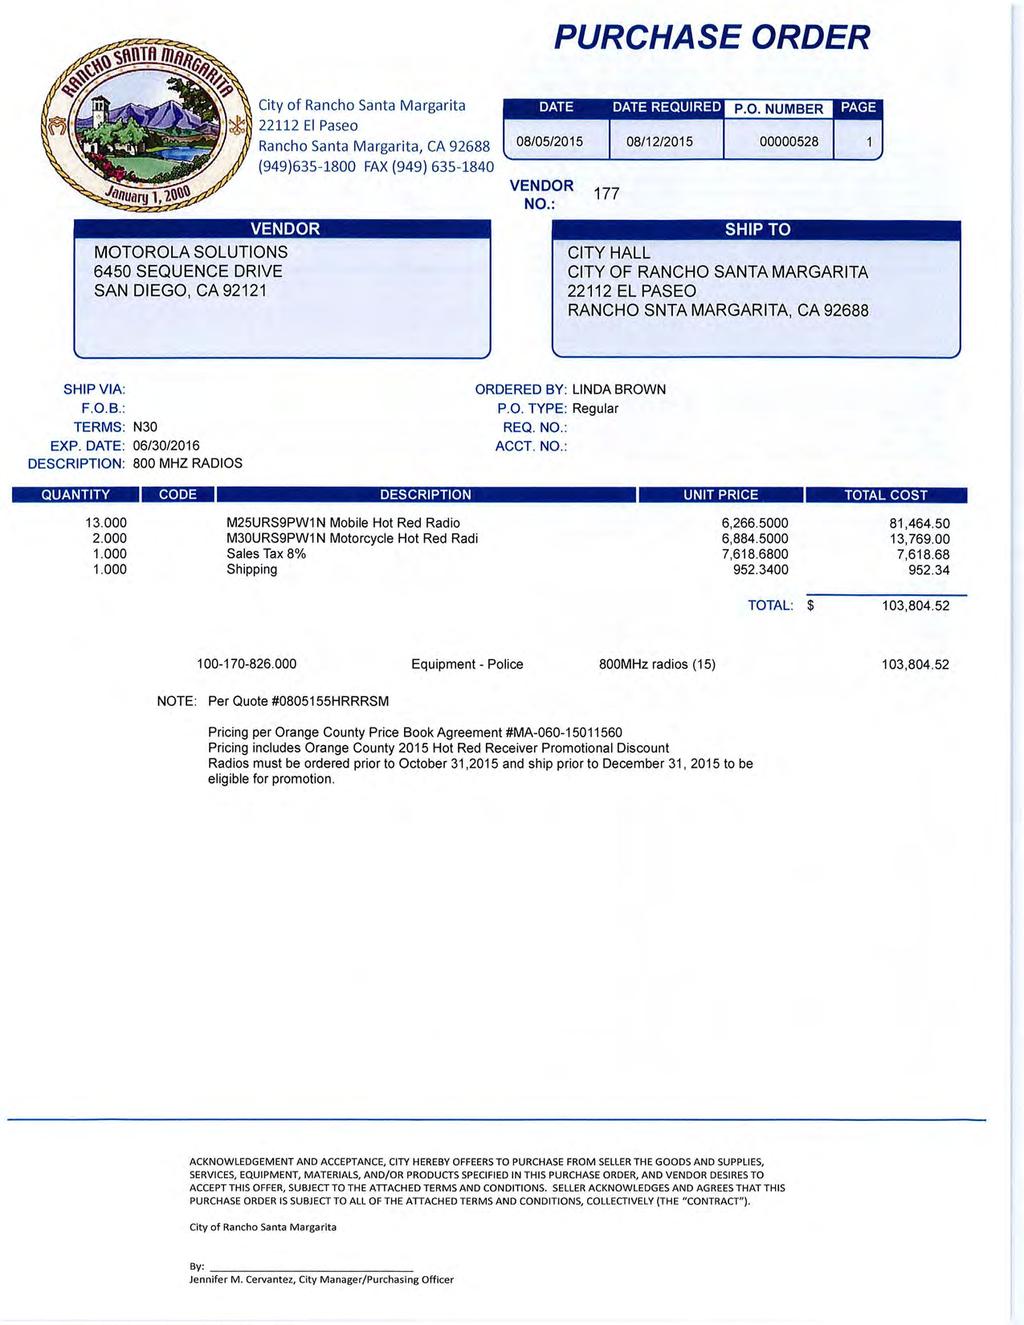 PURCHASE ORDER Page 5 City of Rancho Santa Margarita 22112 El Paseo Rancho Santa Margarita, CA 92688 (949)635-1800 FAX (949) 635-1840 VENDOR MOTOROLA SOLUTIONS 6450 SEQUENCE DRIVE SAN DIEGO, CA 92121